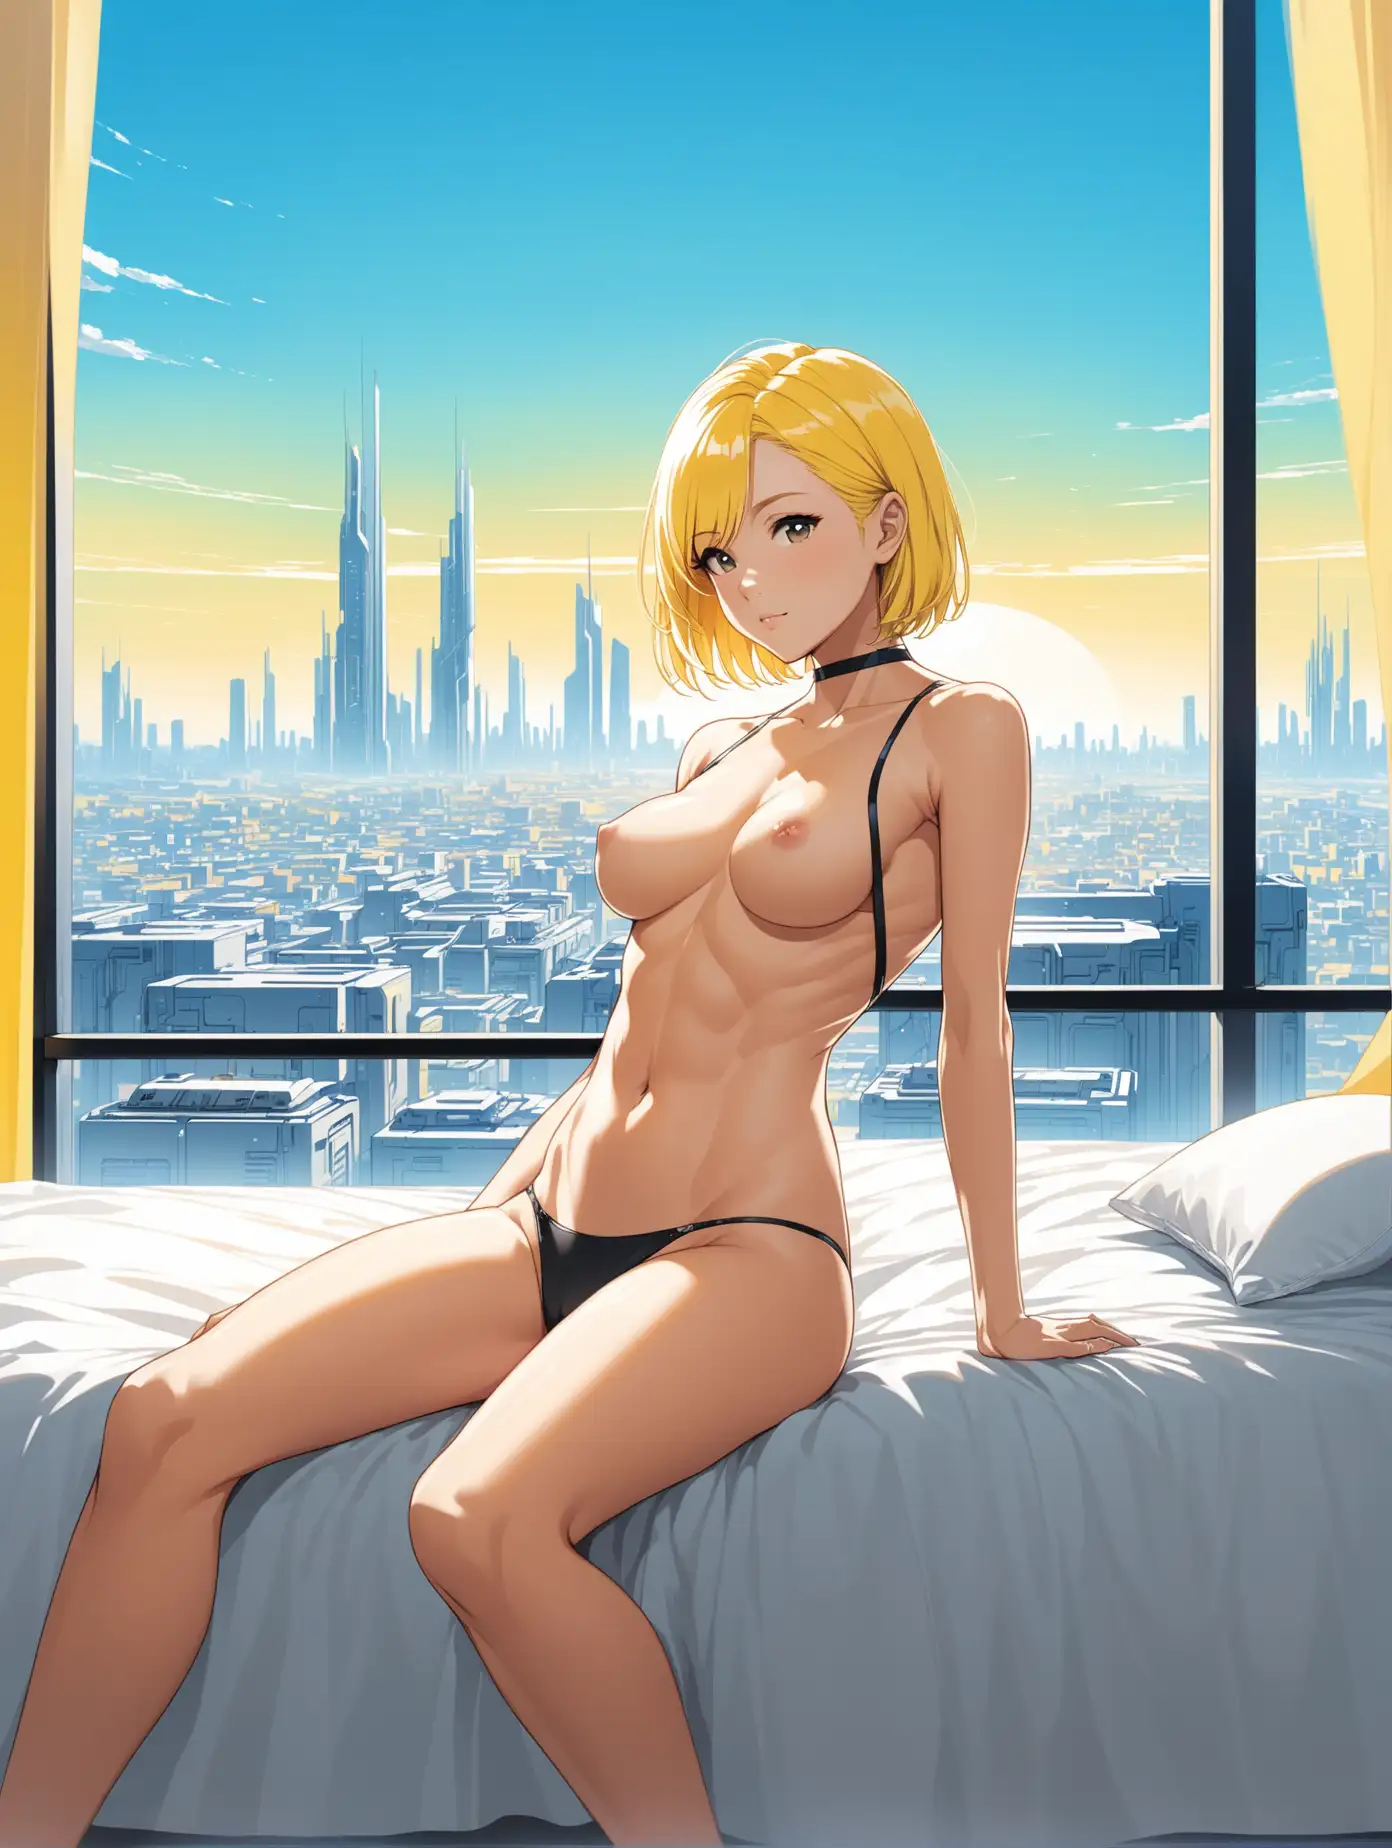 Futuristic Apartment Relaxation YellowHaired Heroine in Minimal Style